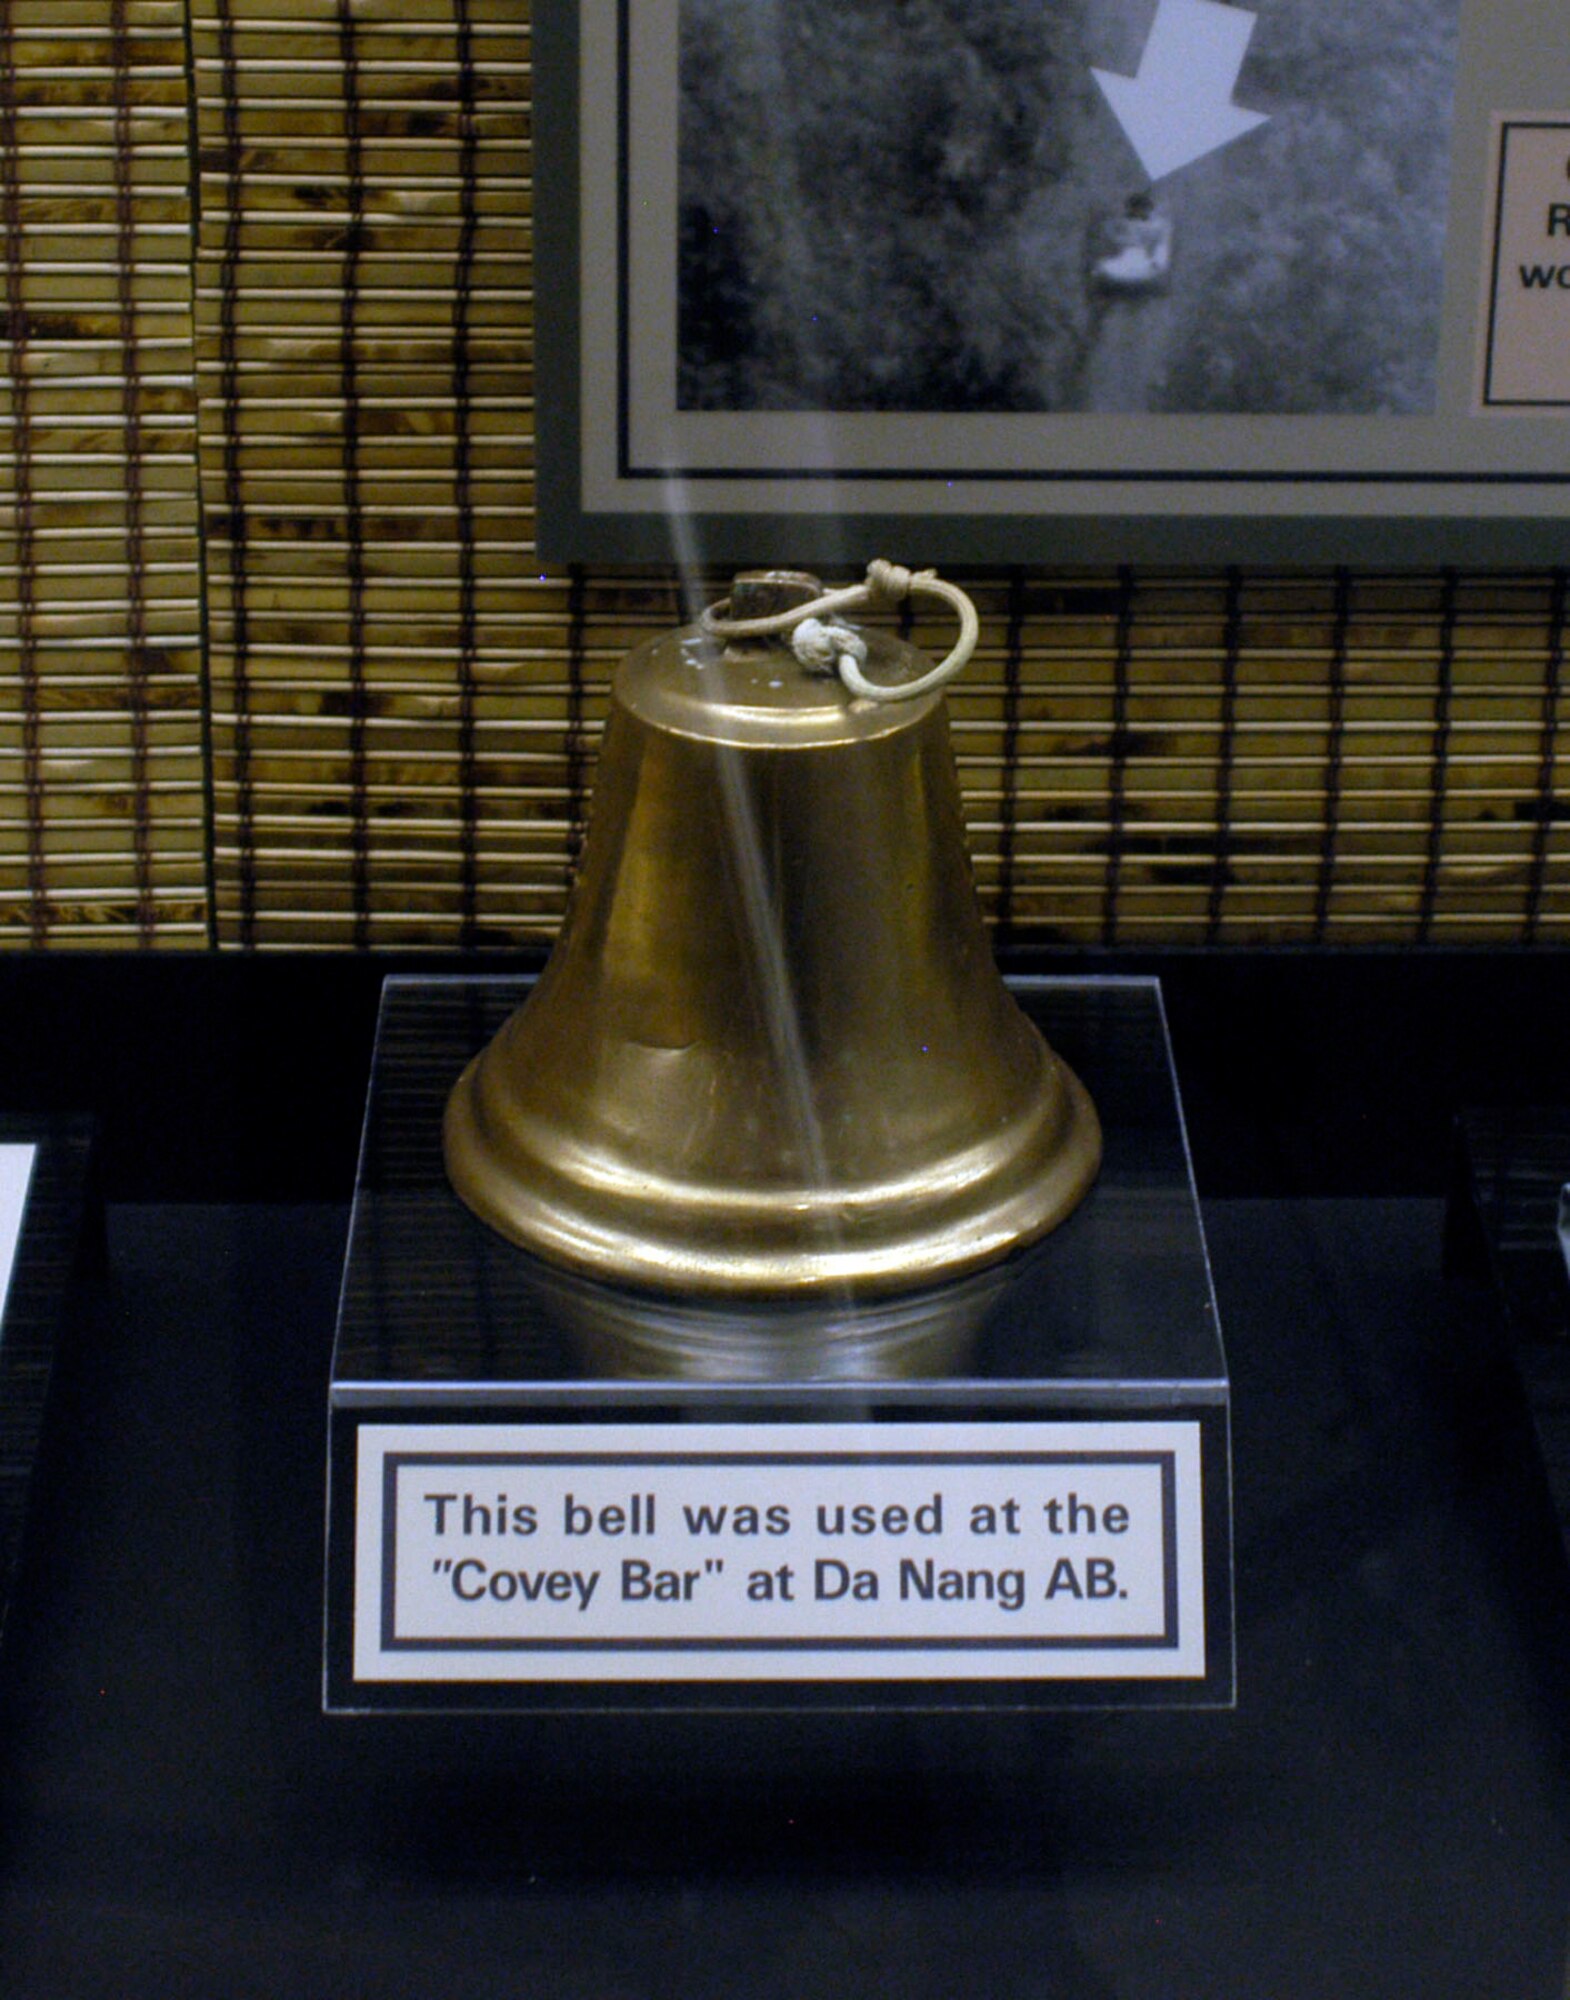 DAYTON, Ohio - This bell was used at the “Covey Bar” at Da Nang AB. The bell is on display in the A Dangerous Business: Forward Air Control exhibit in the Southeast Asia War Gallery at the National Museum of the U.S. Air Force. (U.S. Air Force photo)